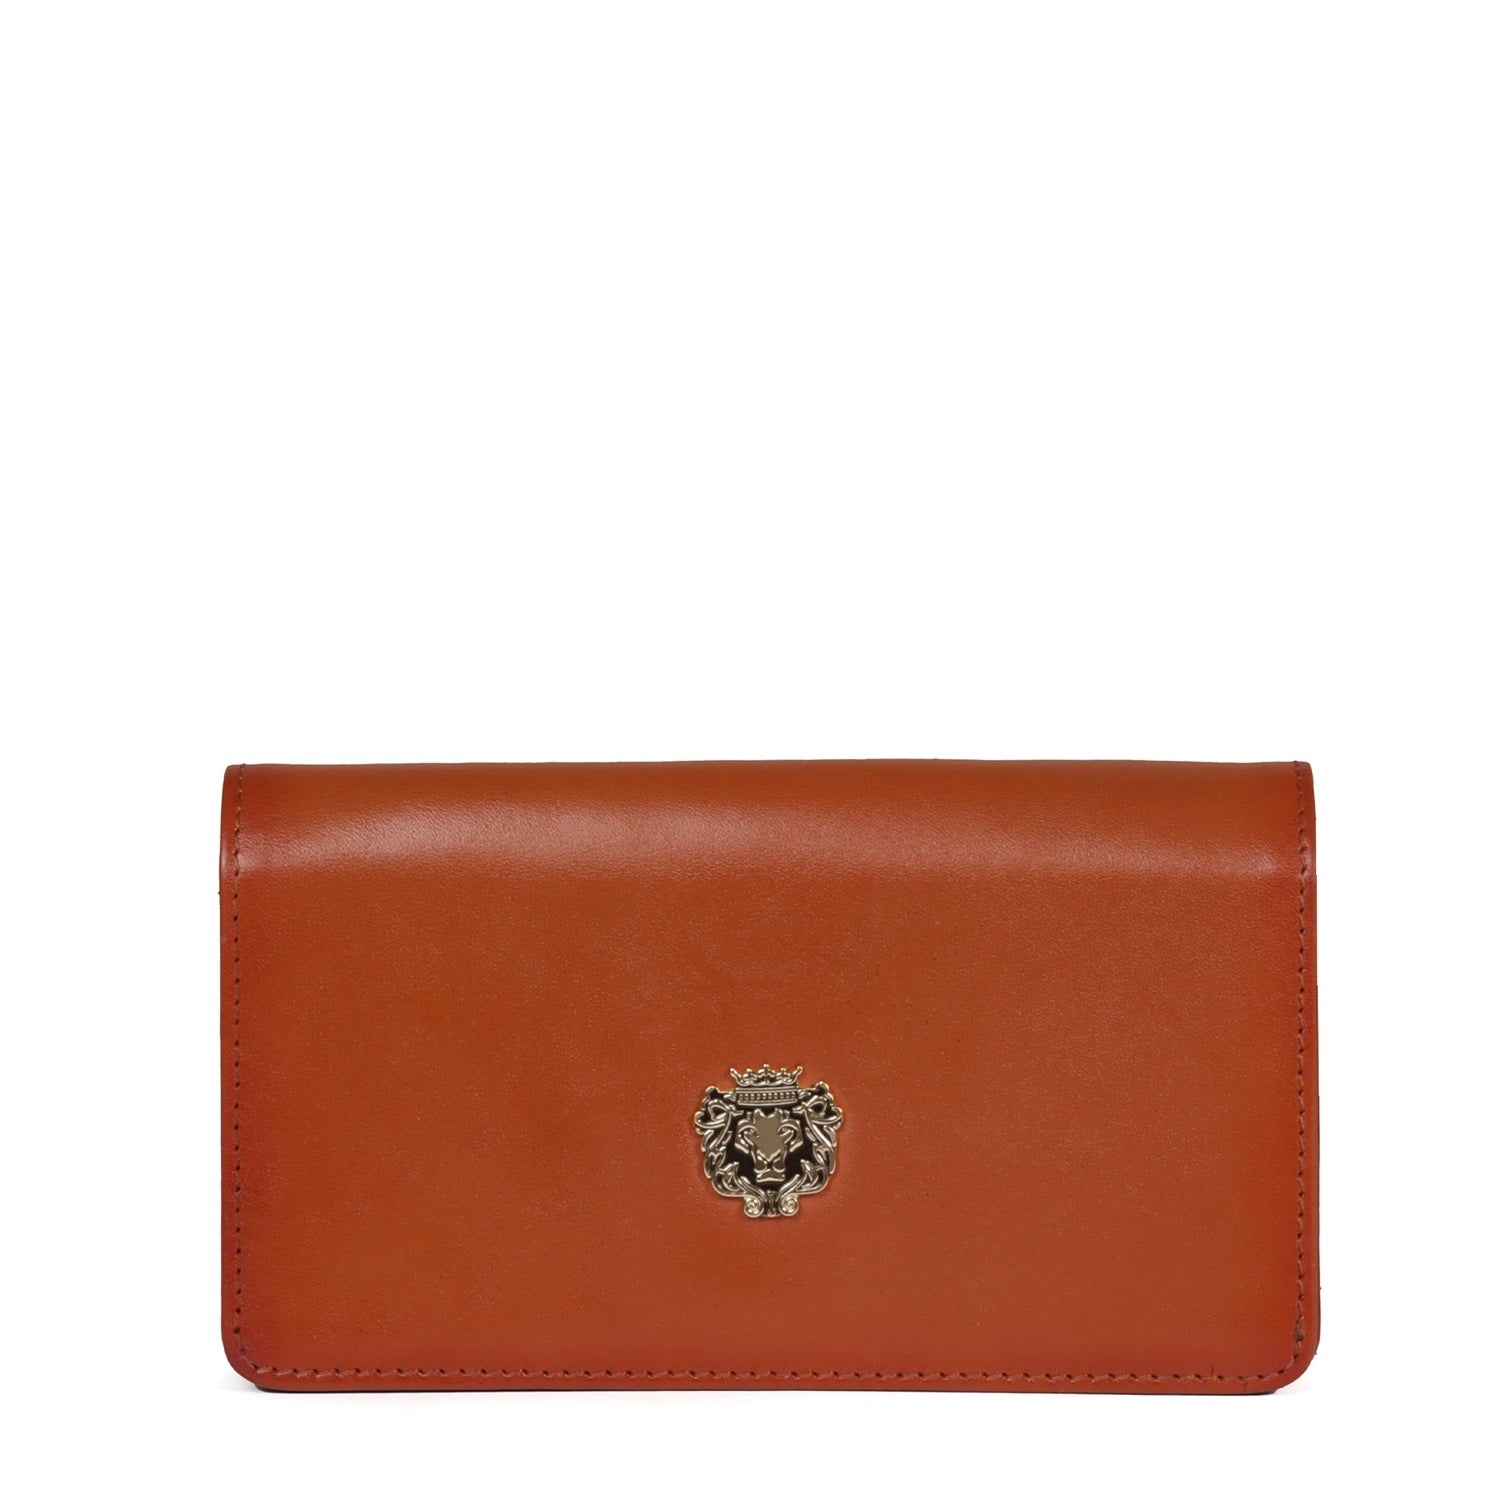 Tan Plain Soft Touch Genuine Leather Ladies Clutch/Wallet with Metal Lion Logo By Brune & Bareskin